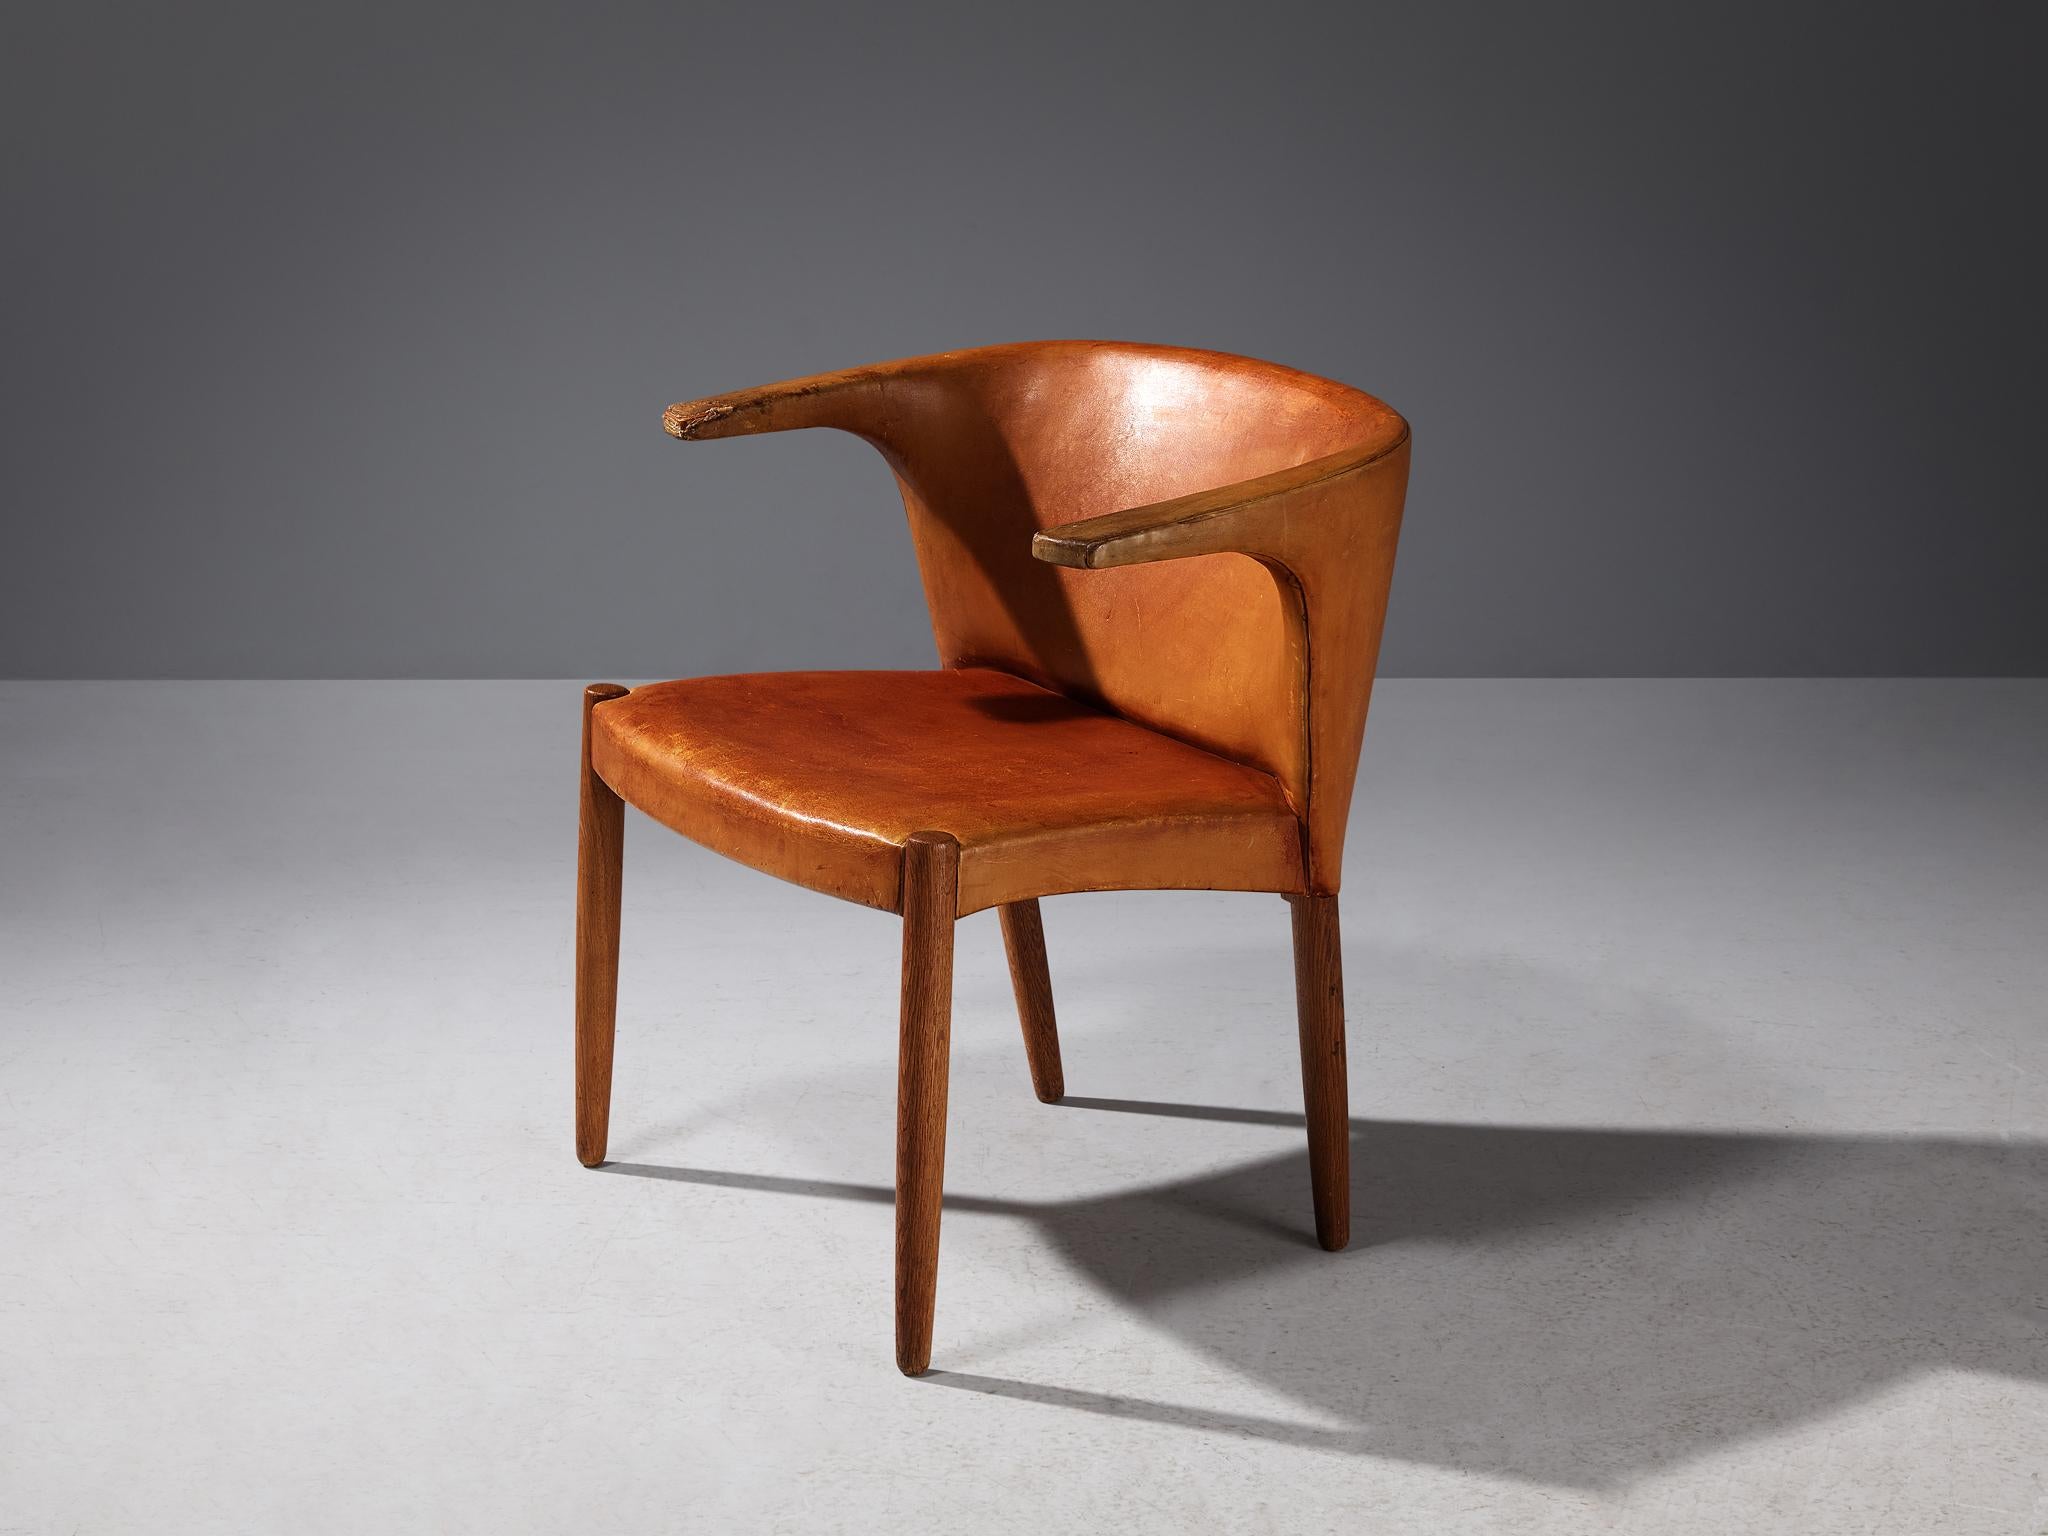 Eskild Pontoppidan for Ludvig Pontoppidan, armchair, cognac leather, oak, Denmark, designed 1962 

This rare armchair by Danish cabinetmaker Eskild Pontoppidan (1933-) truly intensifies the experience of sitting by means of the impressive